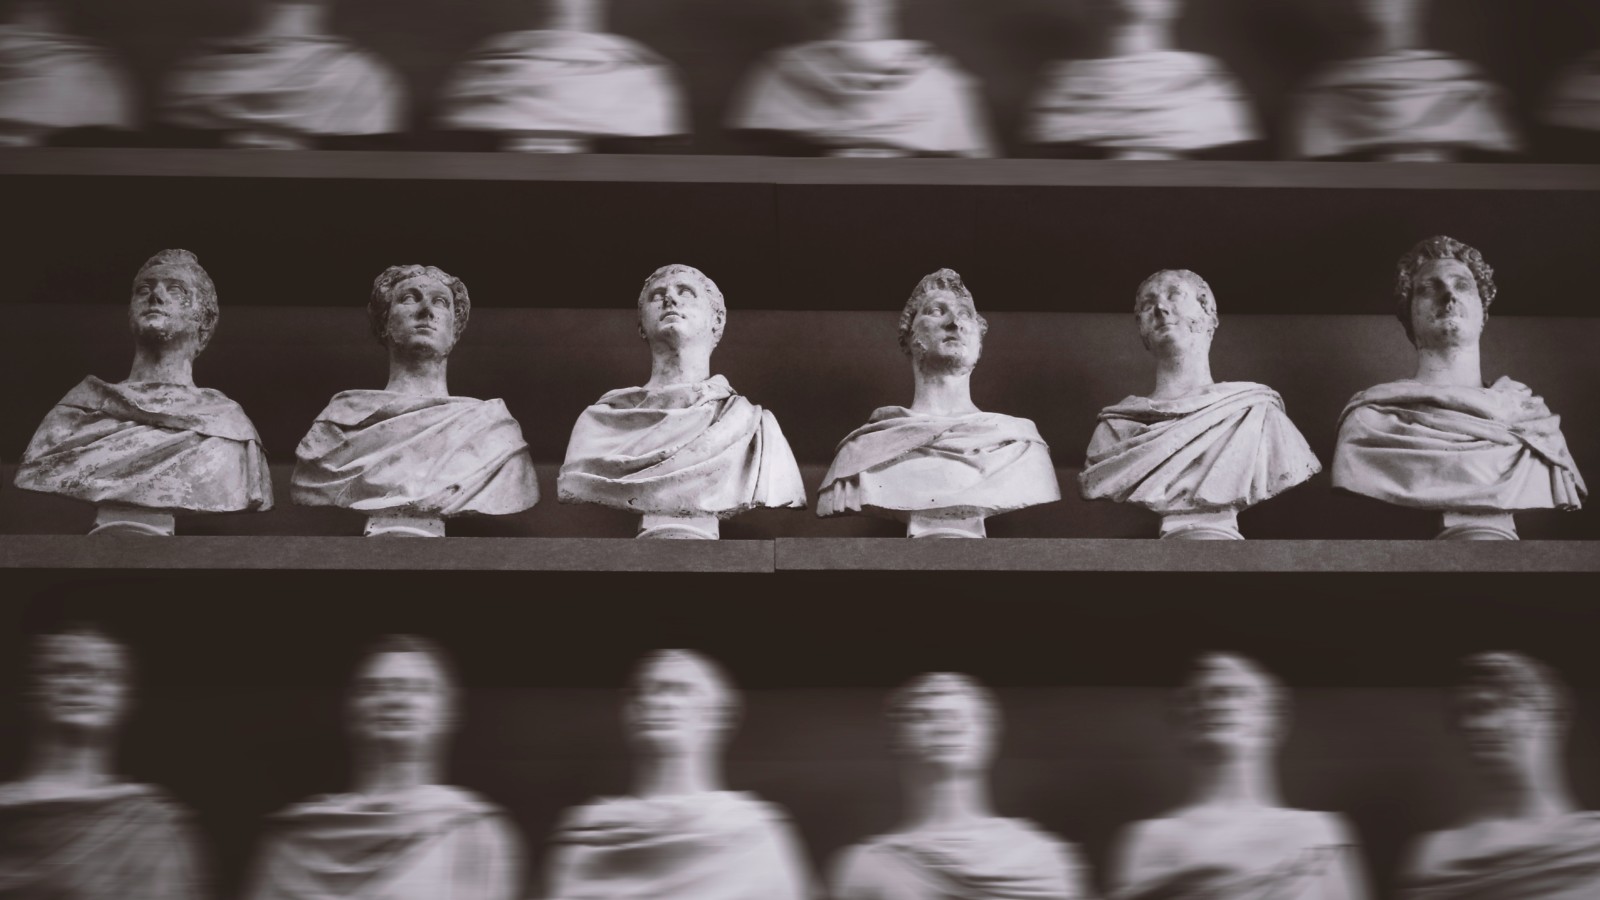 Rows of bust sculptures on shelves